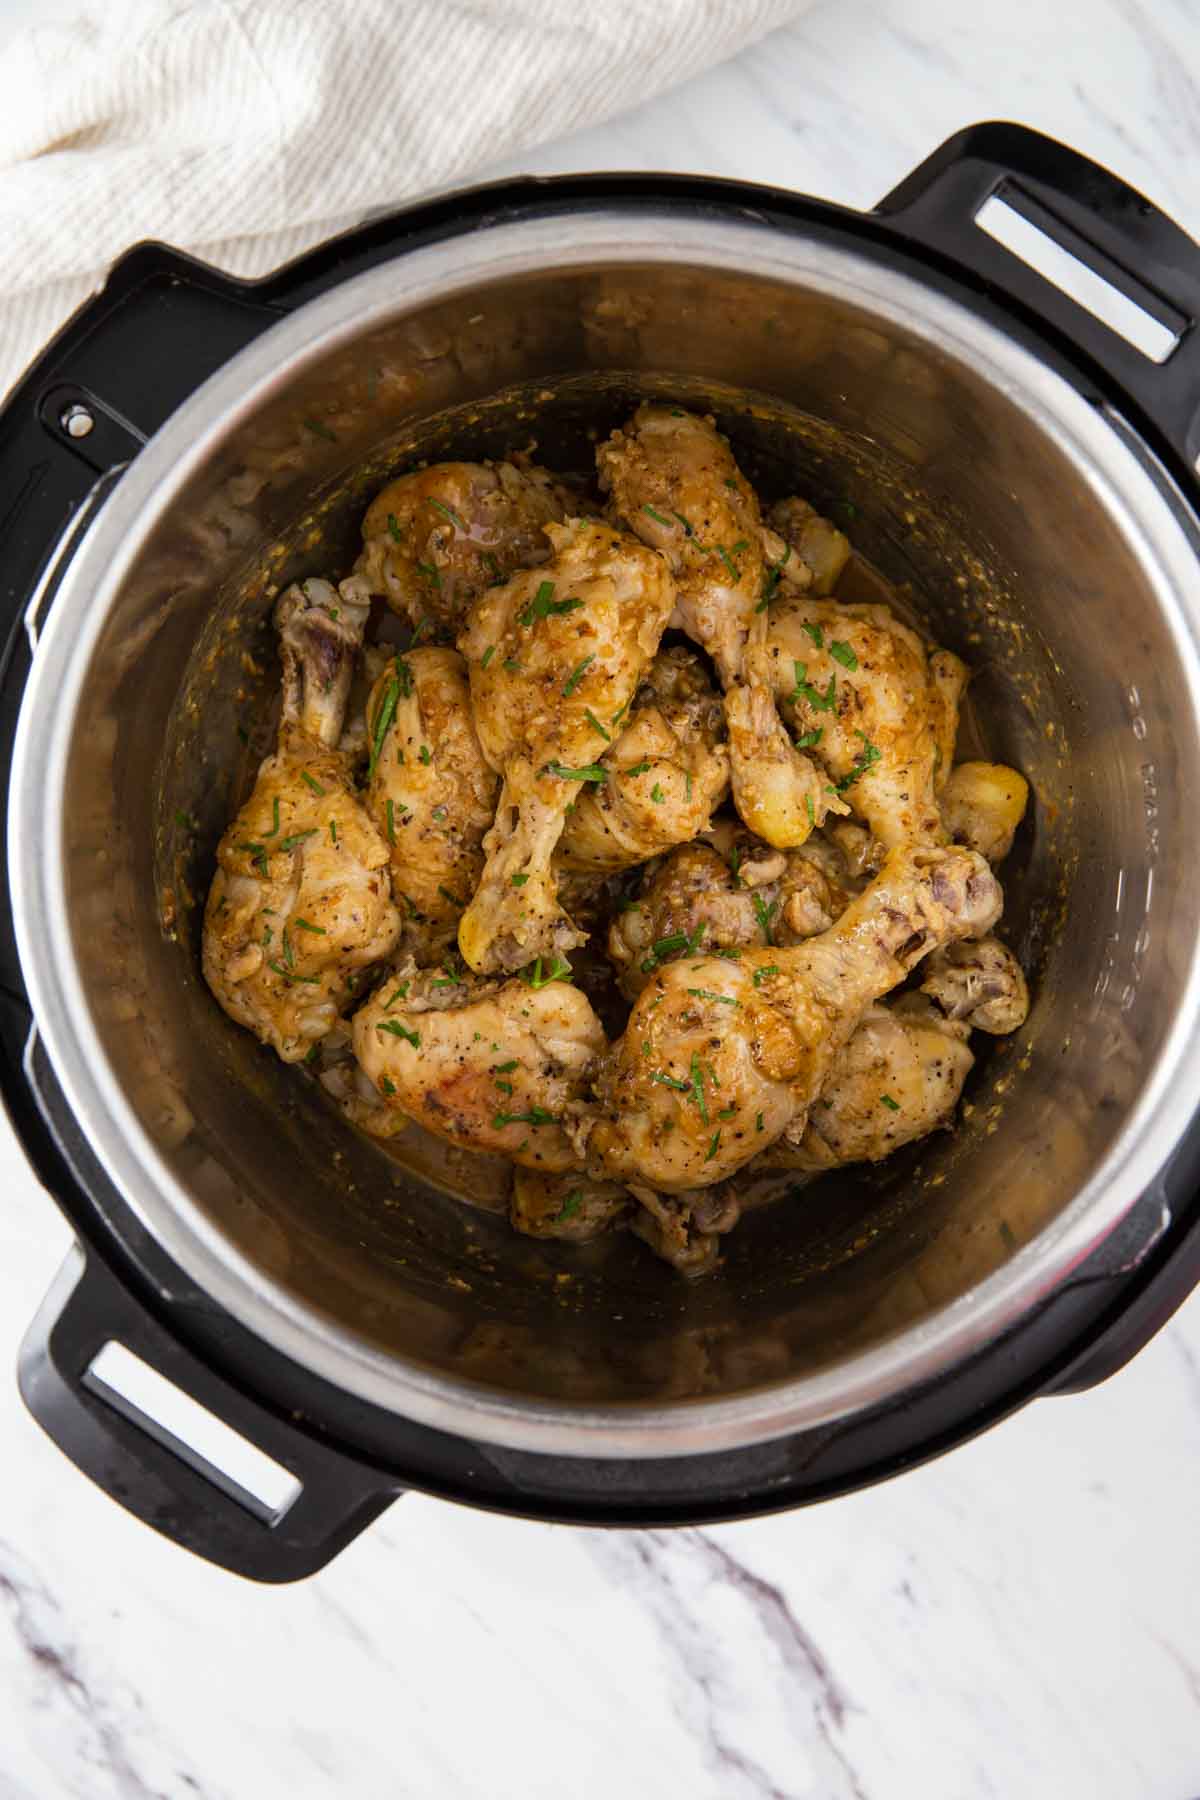 Chicken drumsticks in Instant Pot coated with lemon garlic sauce and garnished with fresh parsley.